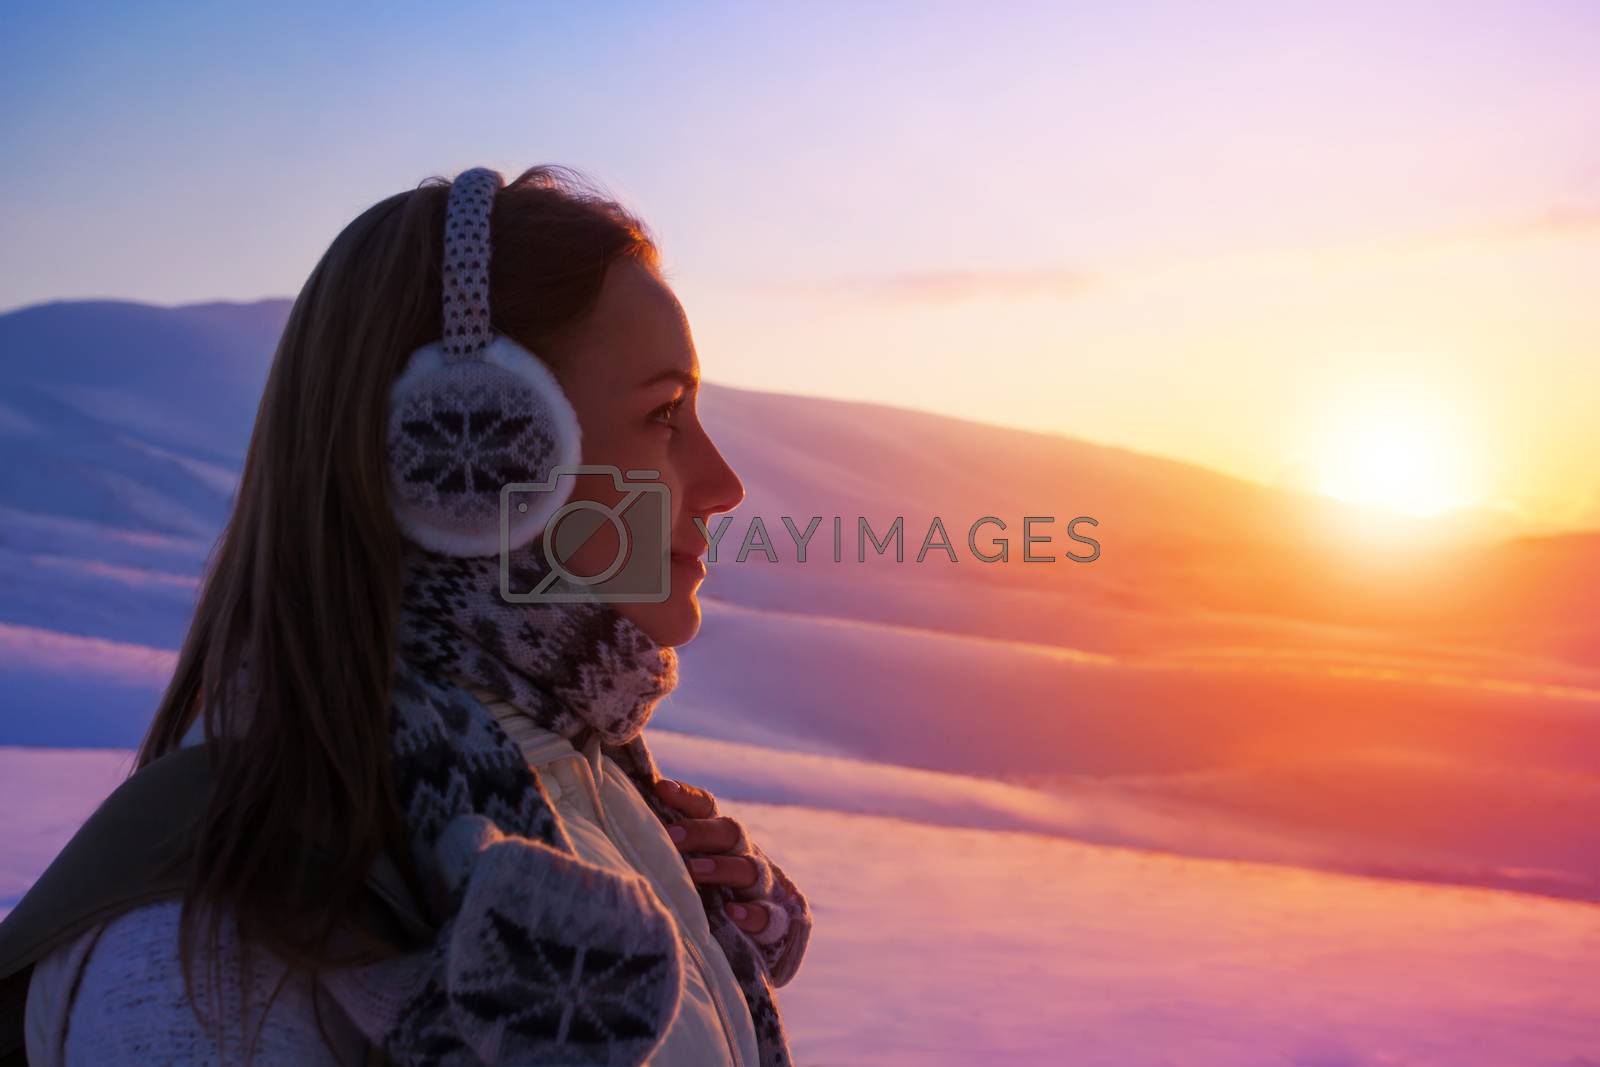 Royalty free image of Winter holidays in the mountains by Anna_Omelchenko